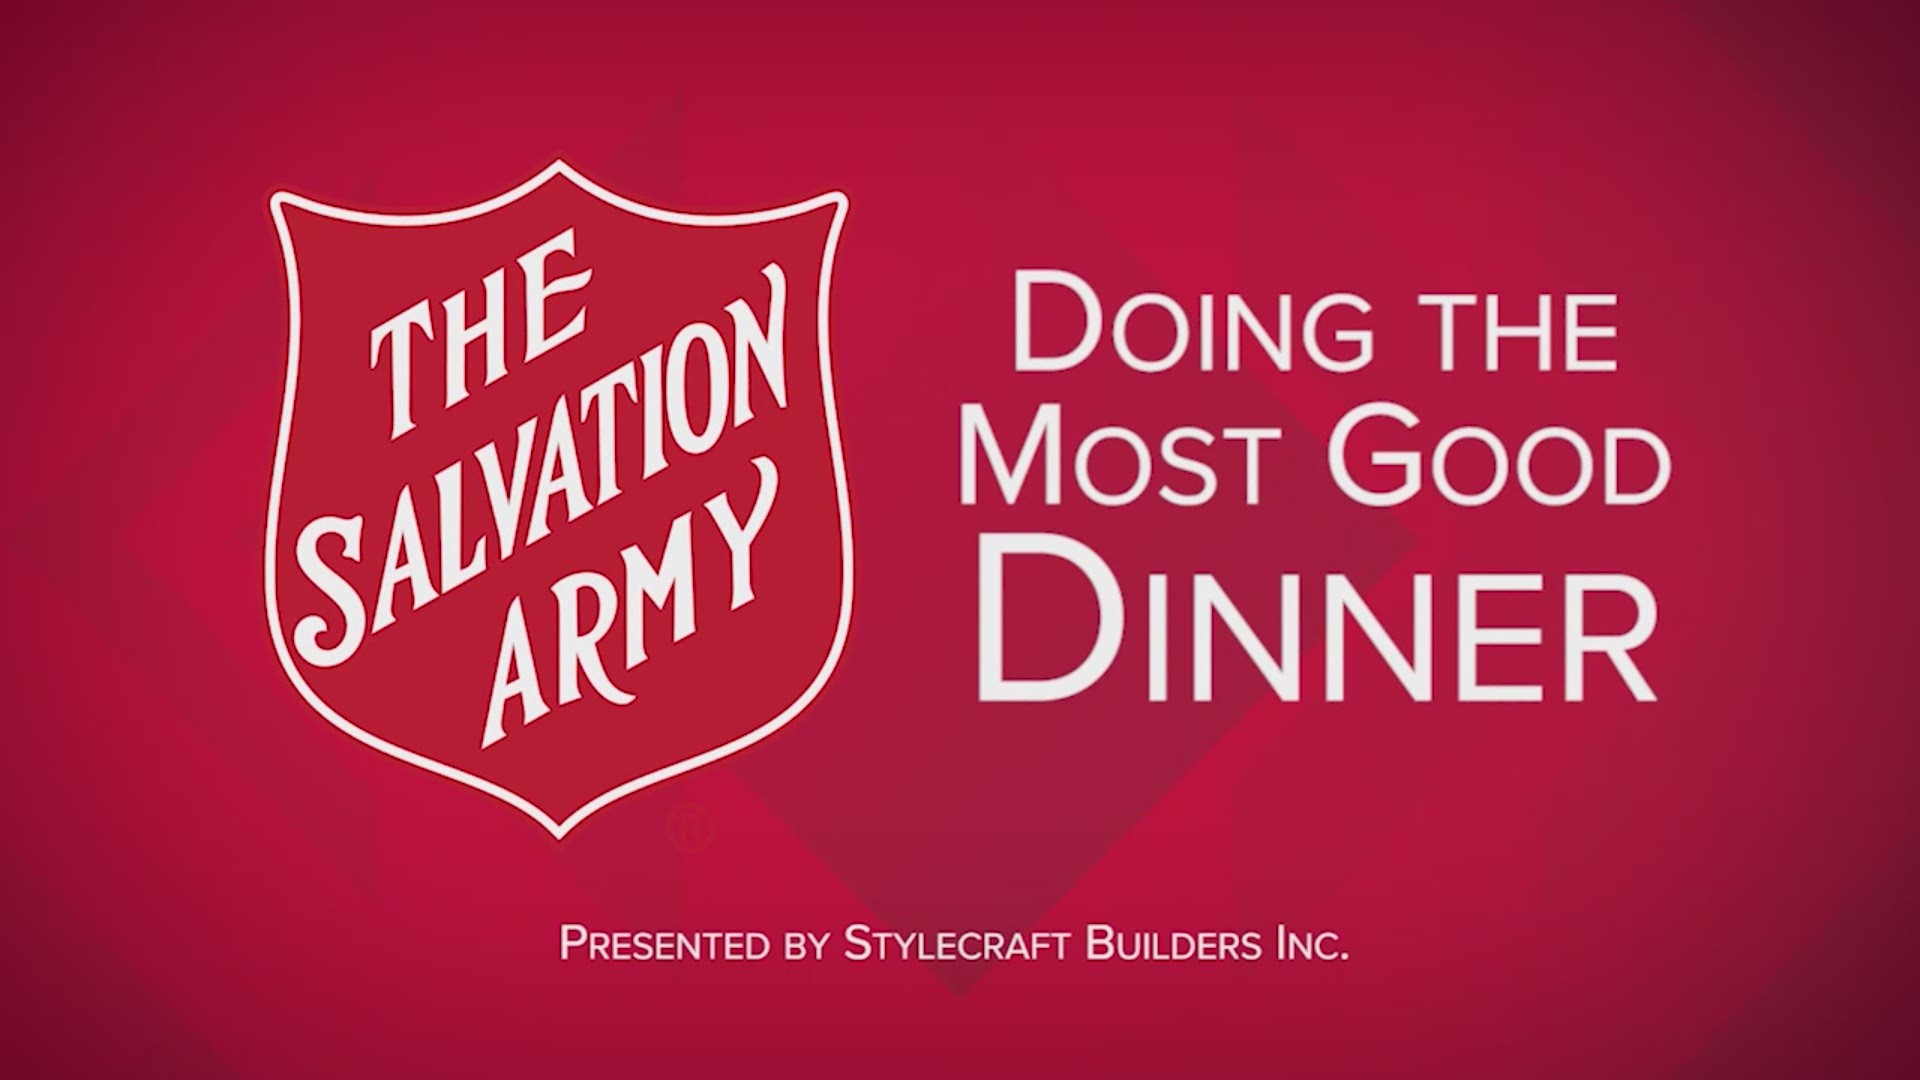 The Salvation Army of Bell County is hosting the 2019 “Doing the Most Most Good” dinner on Nov. 12 at the Hilton Garden Inn in Temple. Proceeds stay in Bell County.d